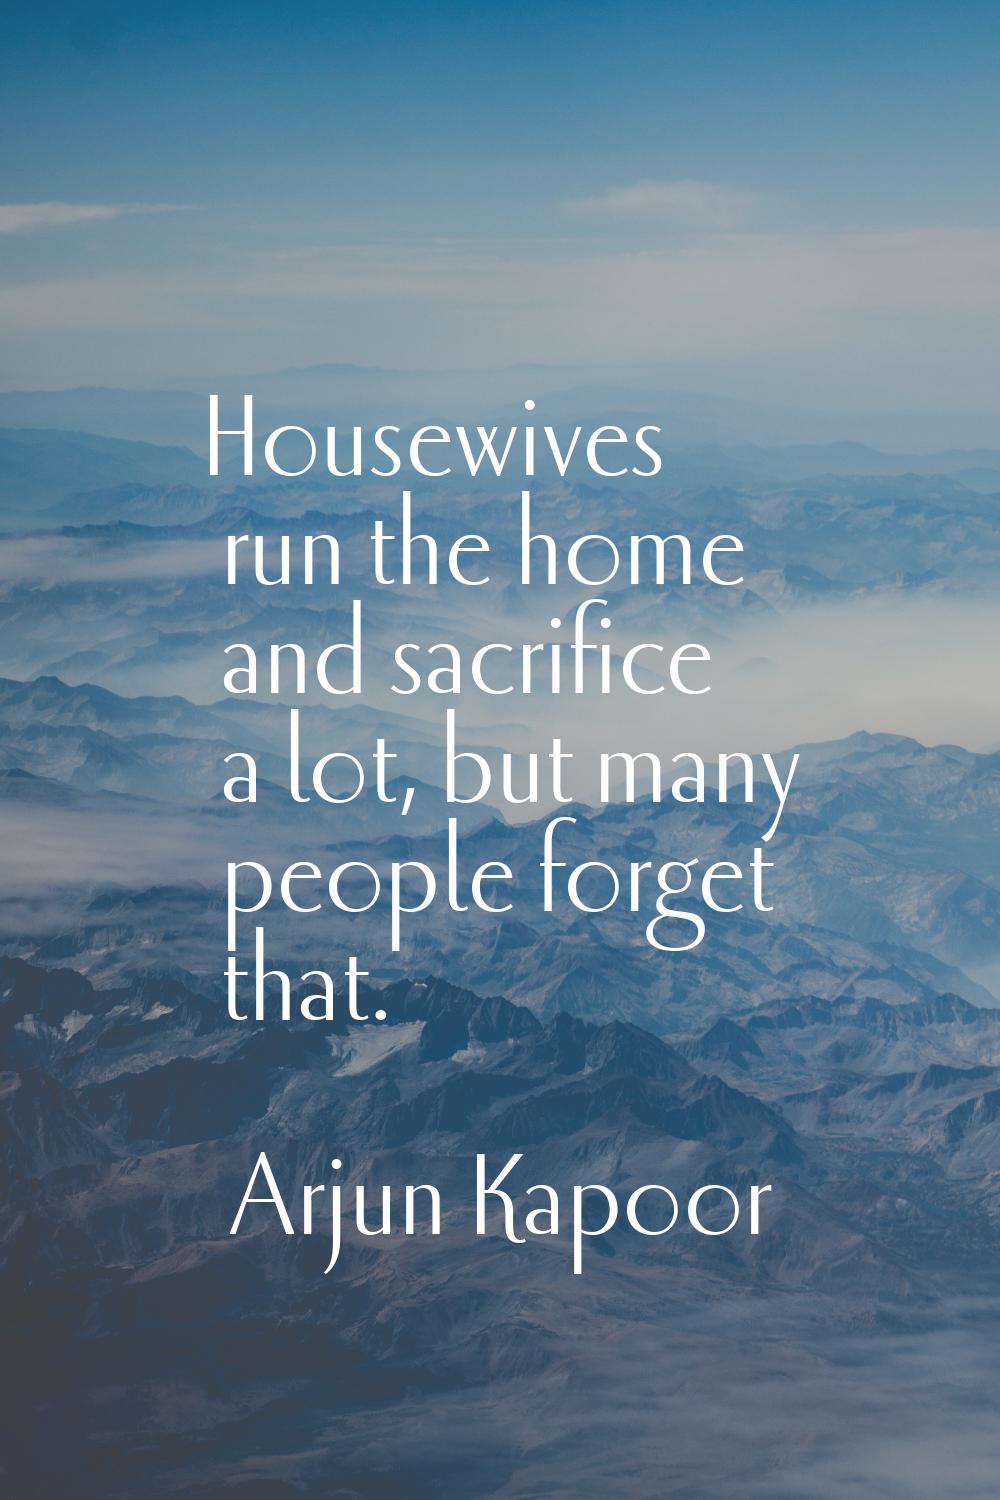 Housewives run the home and sacrifice a lot, but many people forget that.